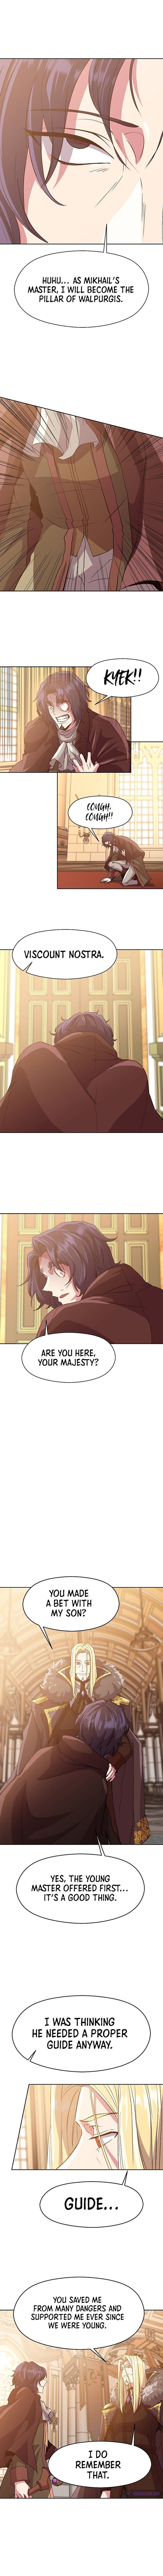 Archmage Transcending Through Regression Chapter 12 page 3